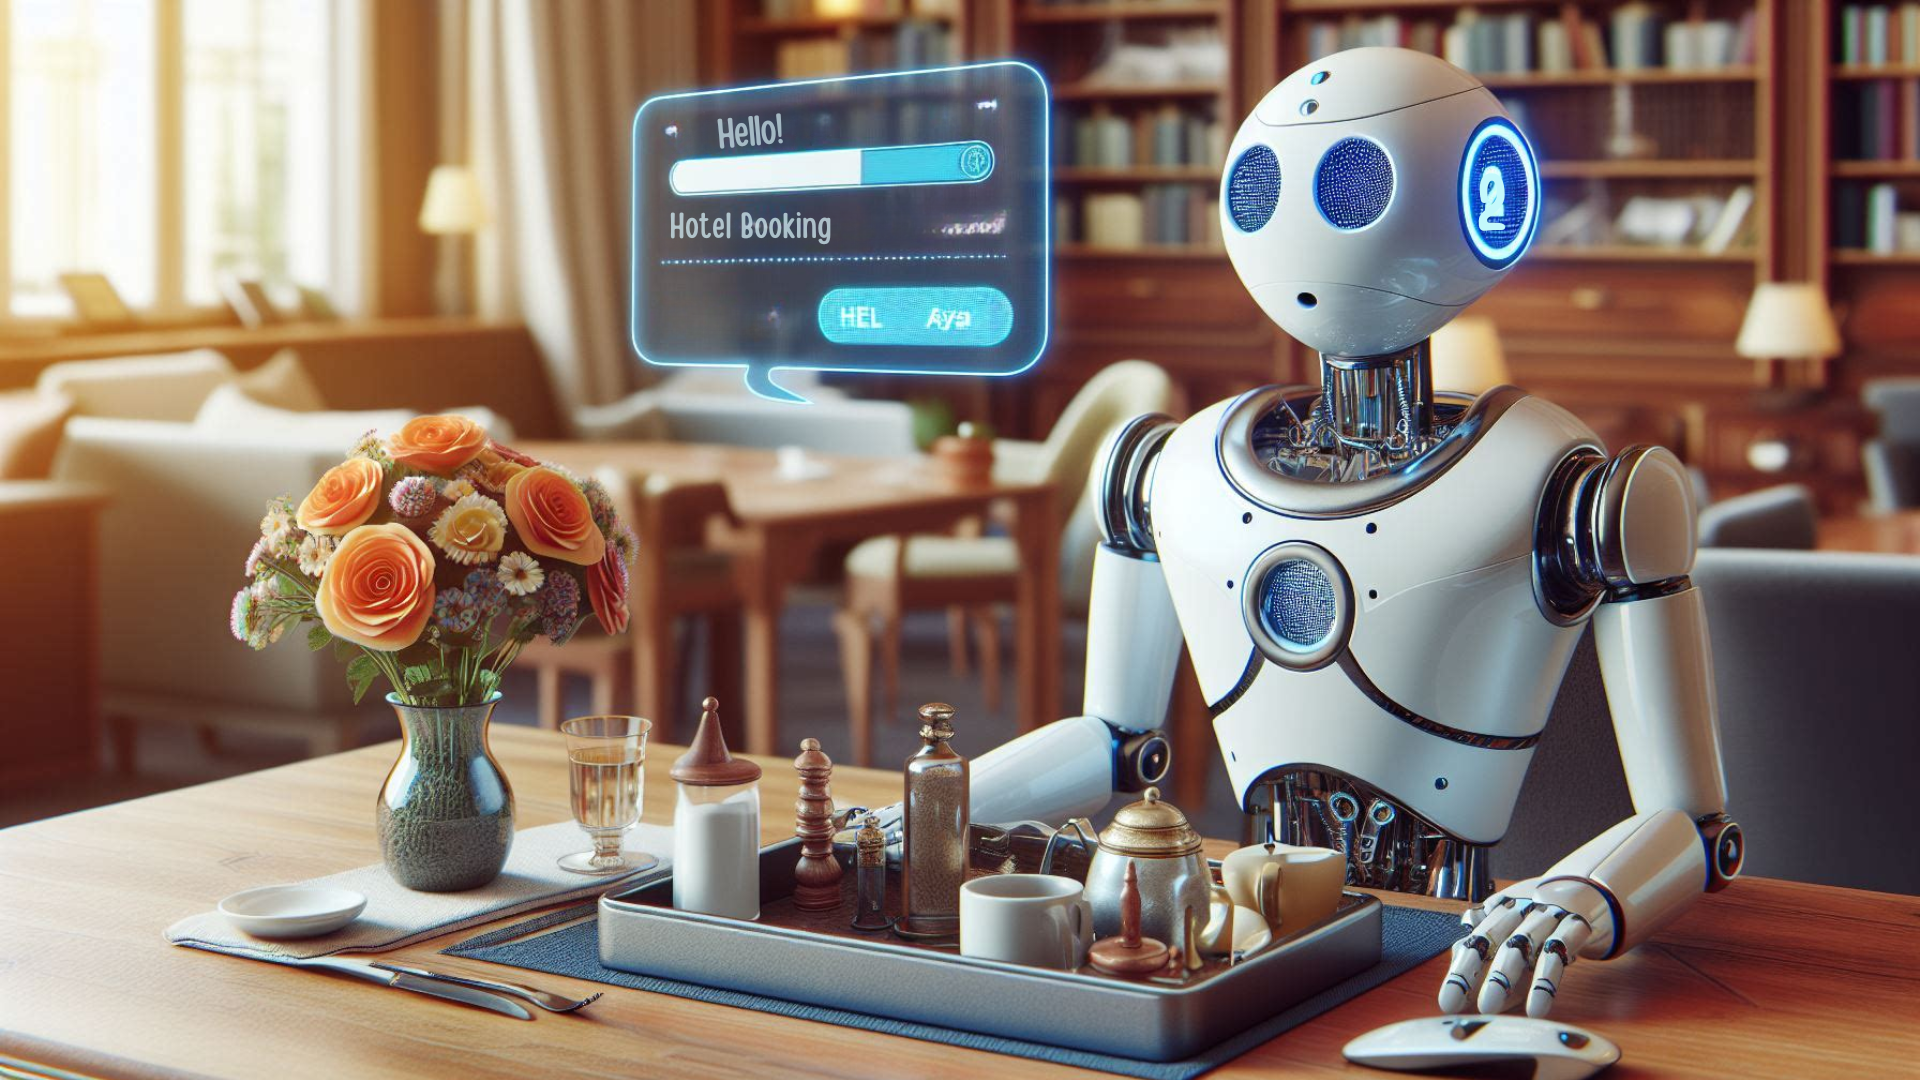 Hotel Chatbot Receptionist: A white-faced robot with a friendly demeanor stands at the hotel front desk, ready to assist guests.